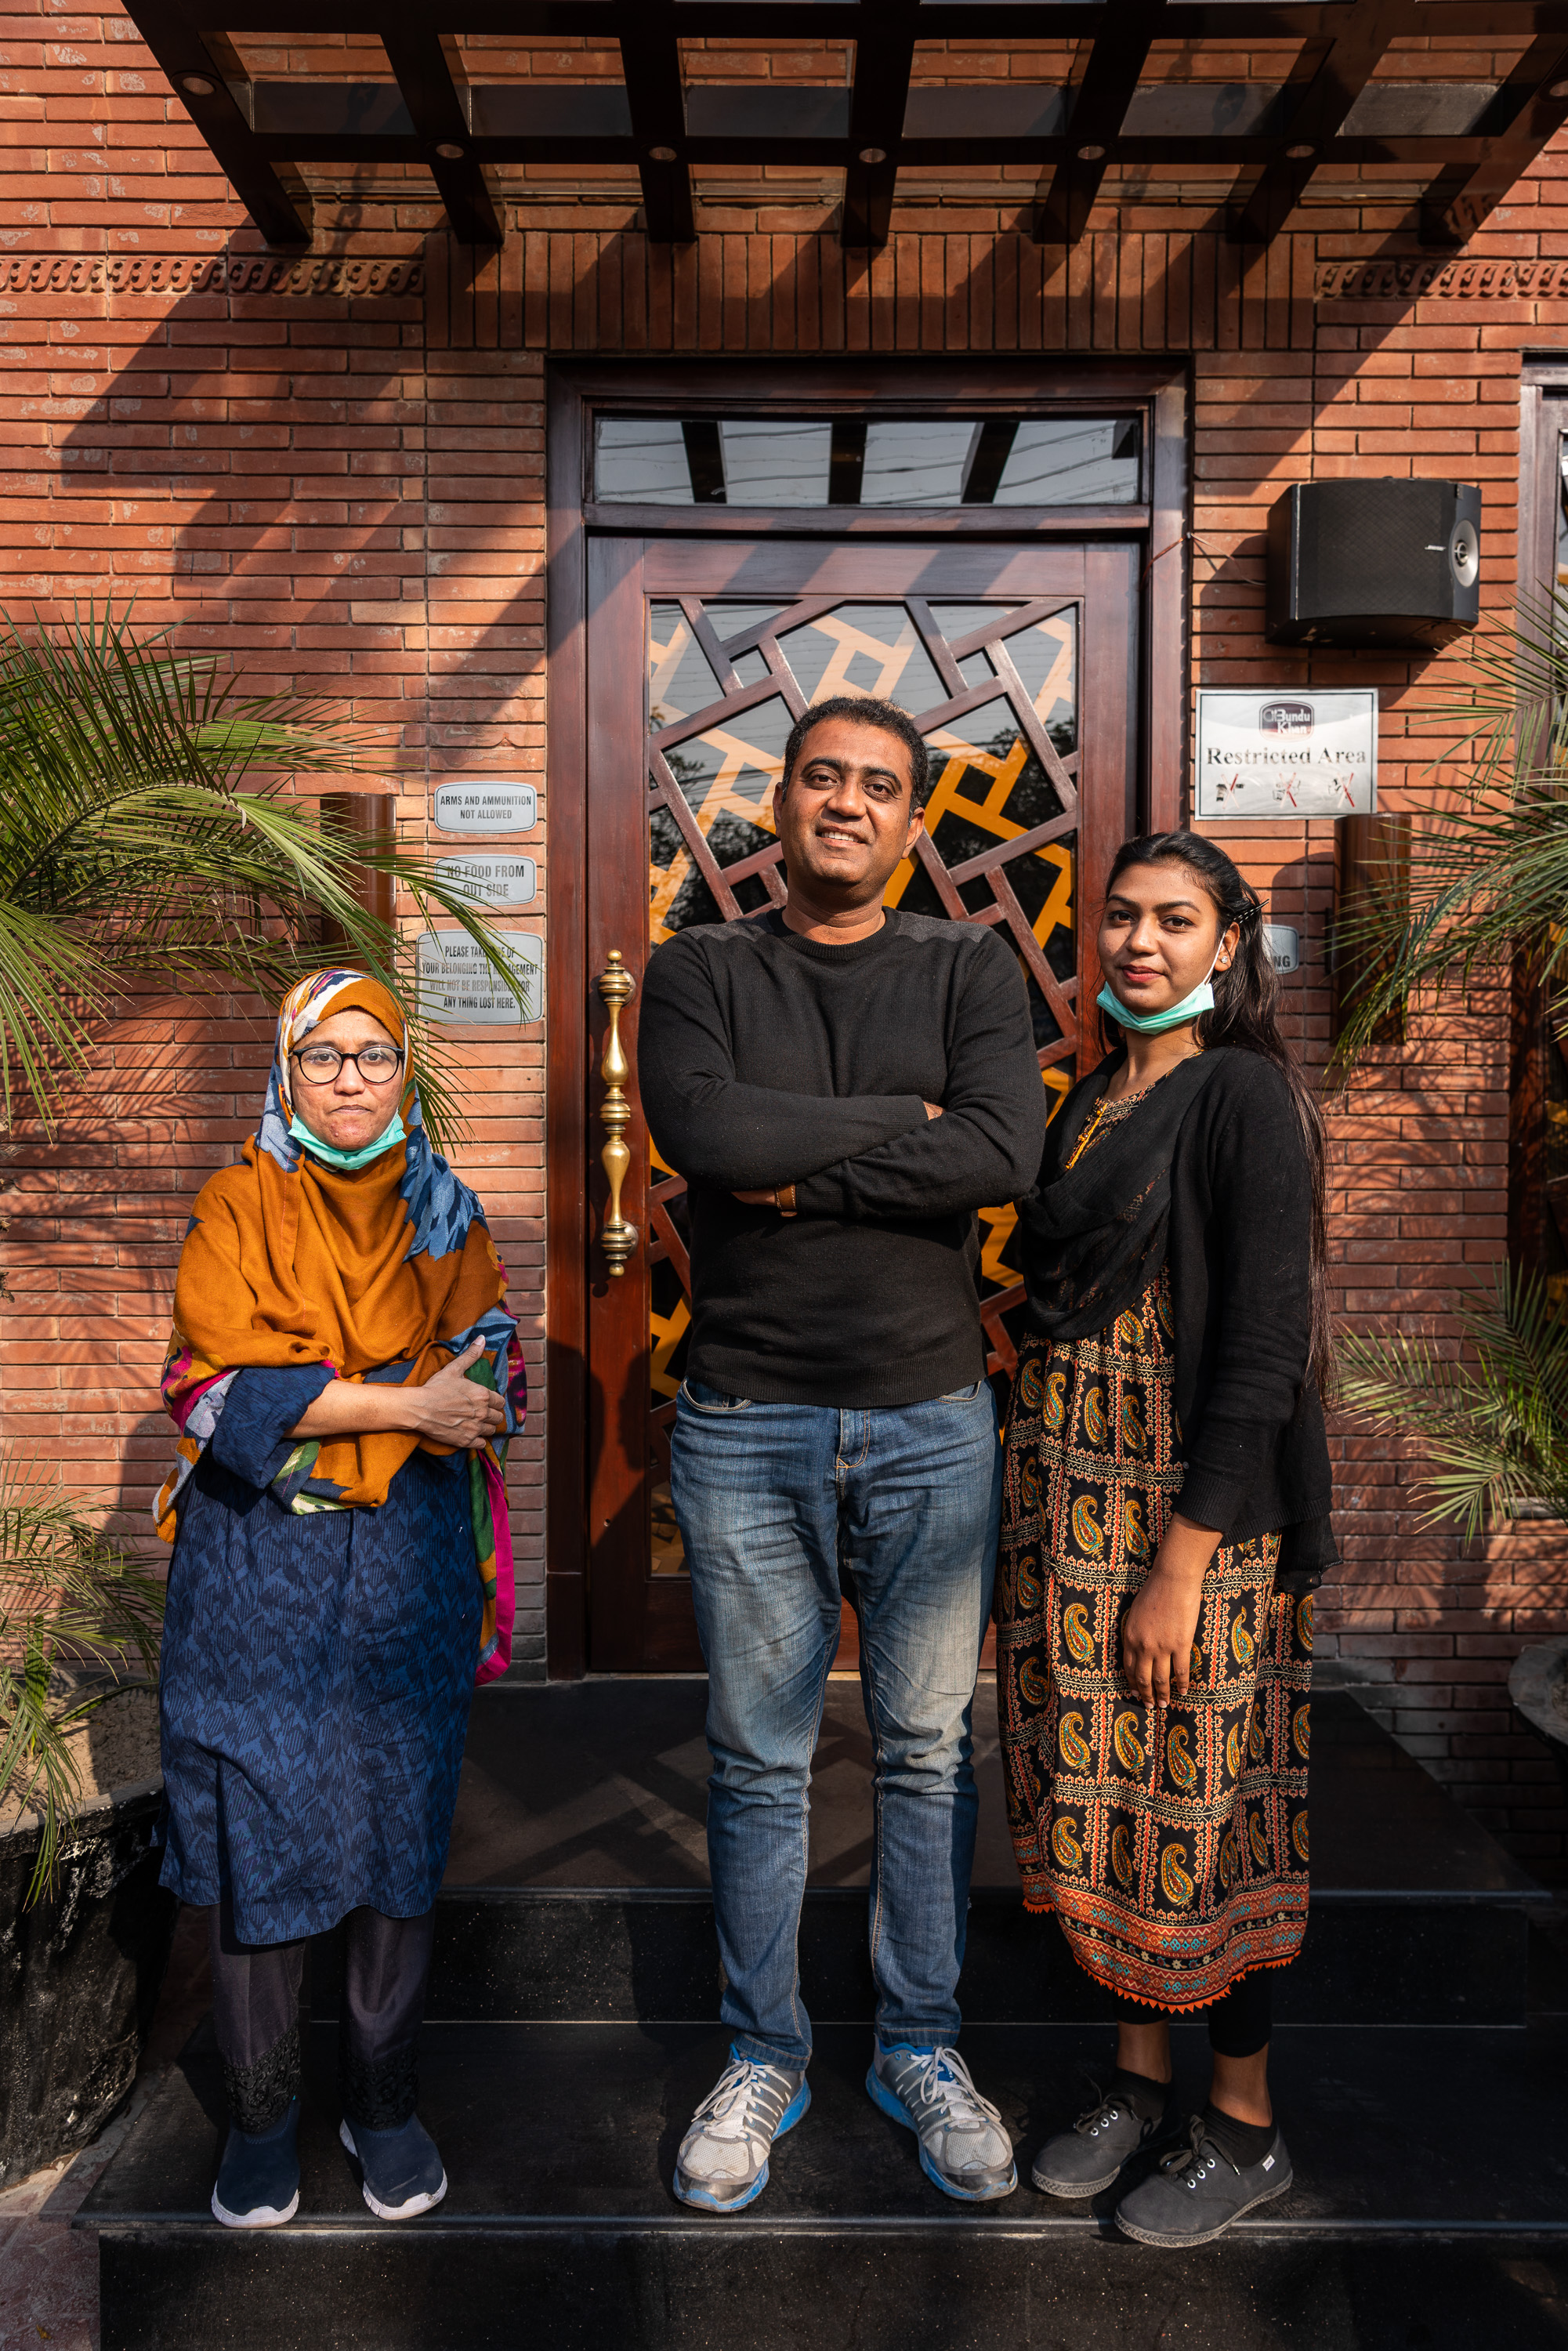 Payyam-e Khurram is the founder of the Pink Riders and is seen here posing for a photo with two of his students in Lahore, Pakistan. He had to fight off a lot of hostility and is now proud to have founded the Pink Riders in 2018. He actually works as an event manager (photo: Philipp Breu)